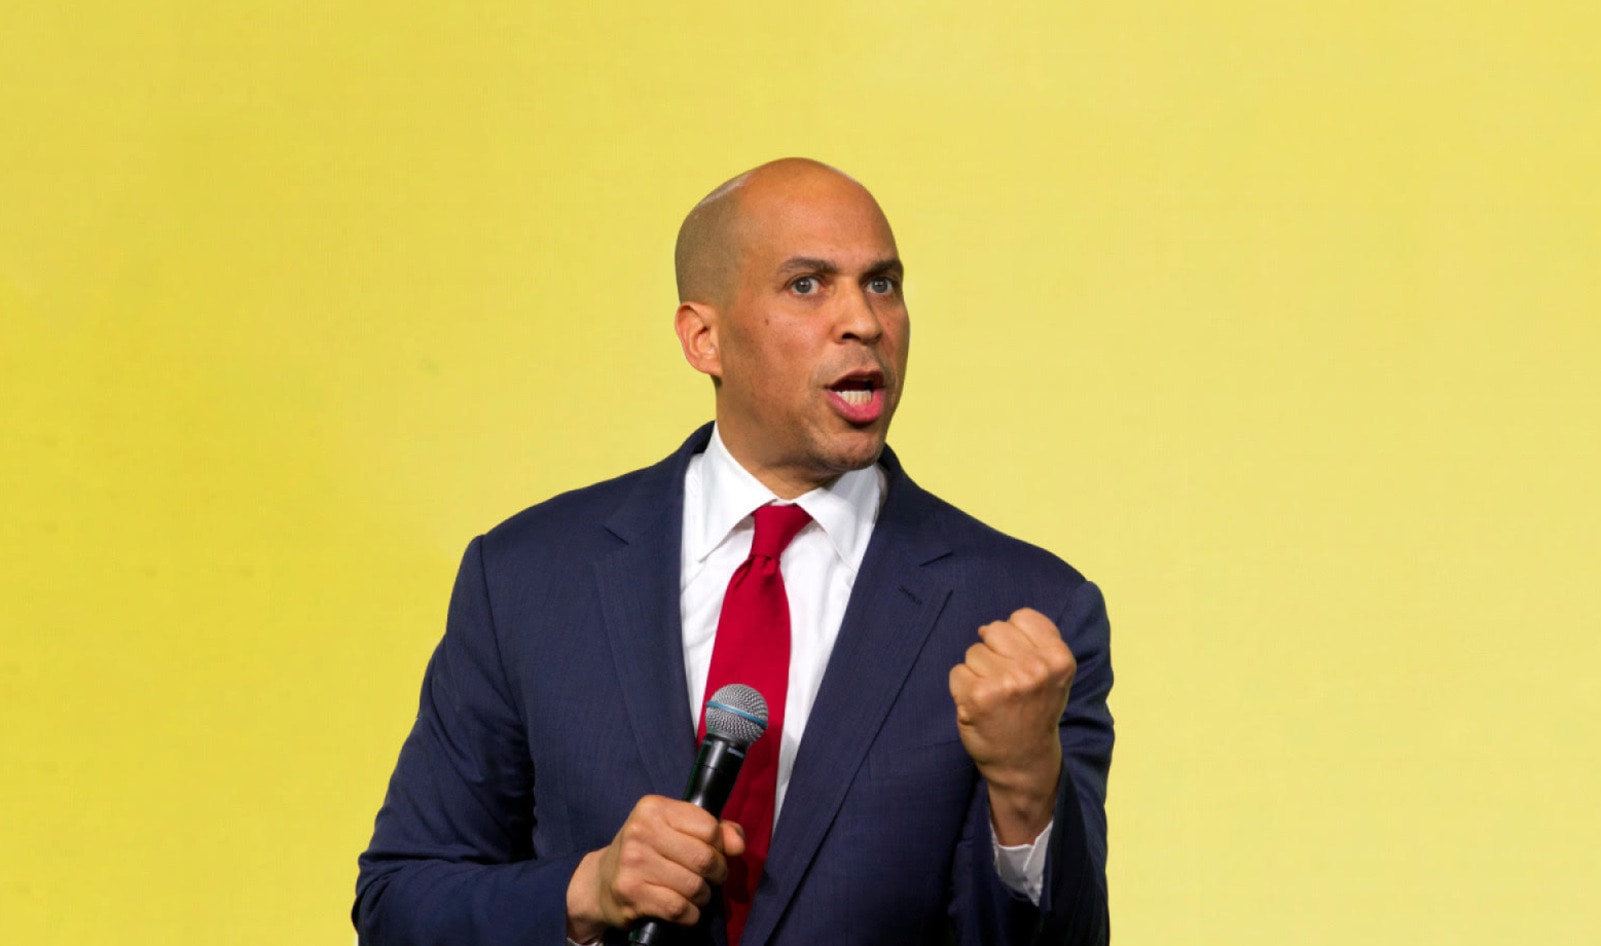 Vegan Senator Cory Booker: “In This Moral Moment, We Must Choose to Be Agents of Justice”